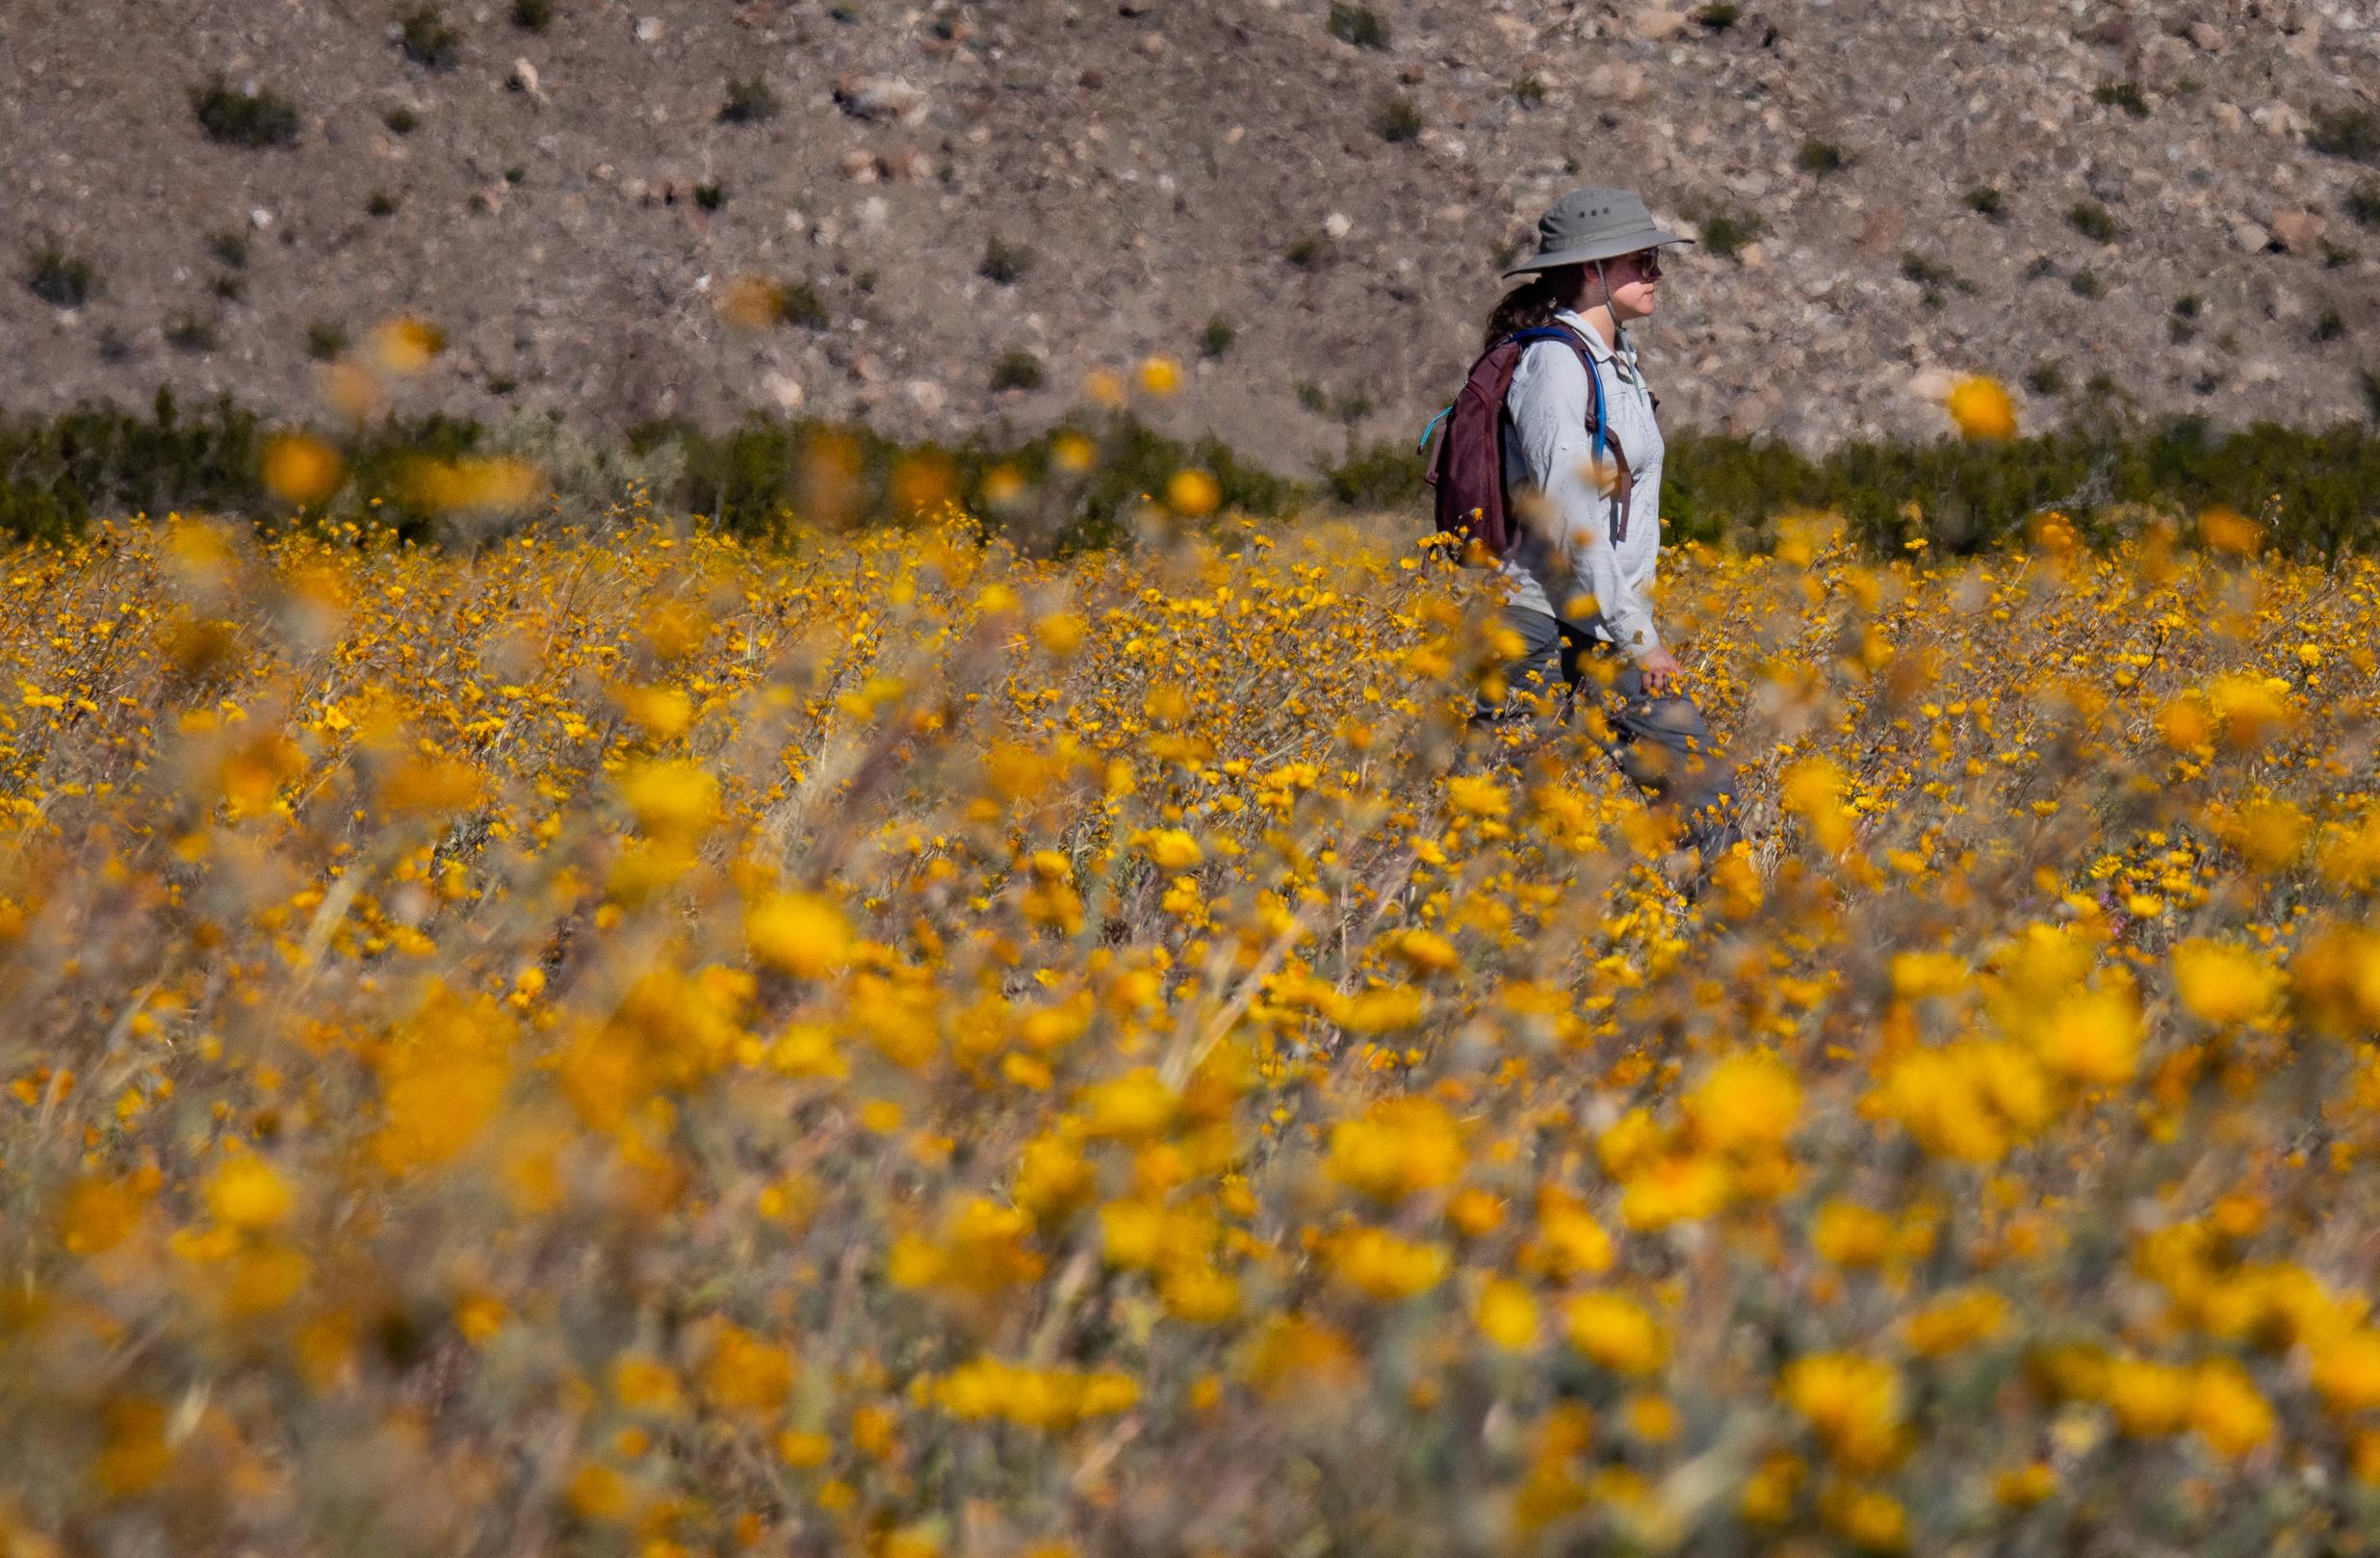 California Deserts Come Alive With Wildflower Blooms